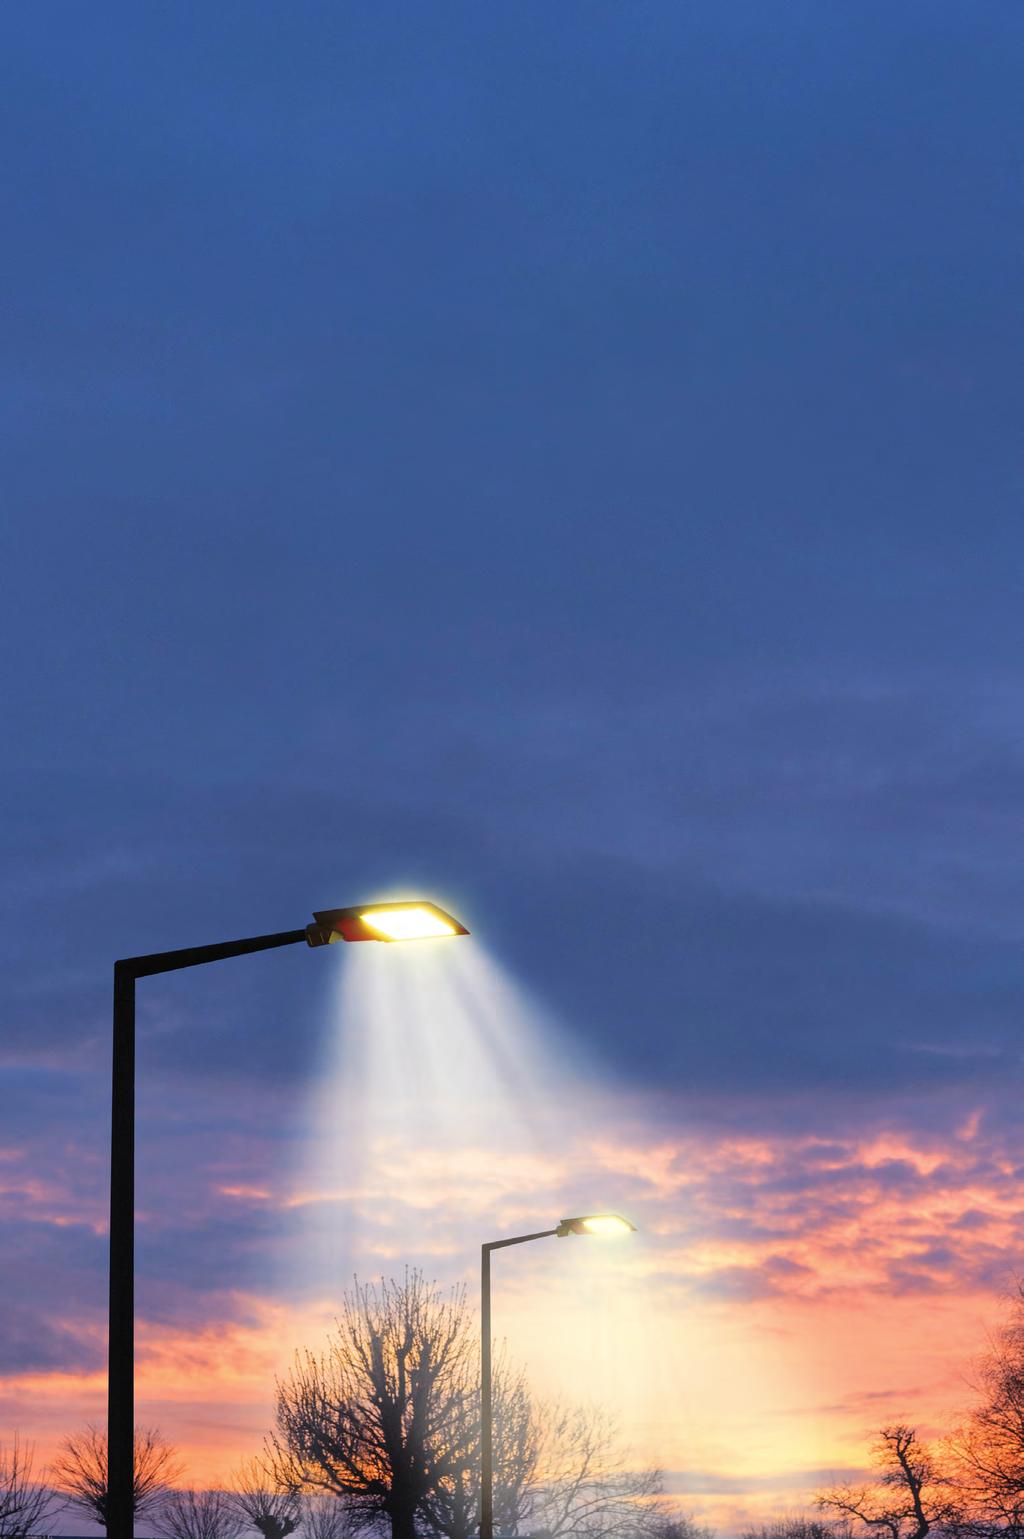 The Streetlight-EPC Project Triggering the market uptake of Energy Performance Contracting through street lighting refurbishment Despite the great potential, most European regions have not yet seen a